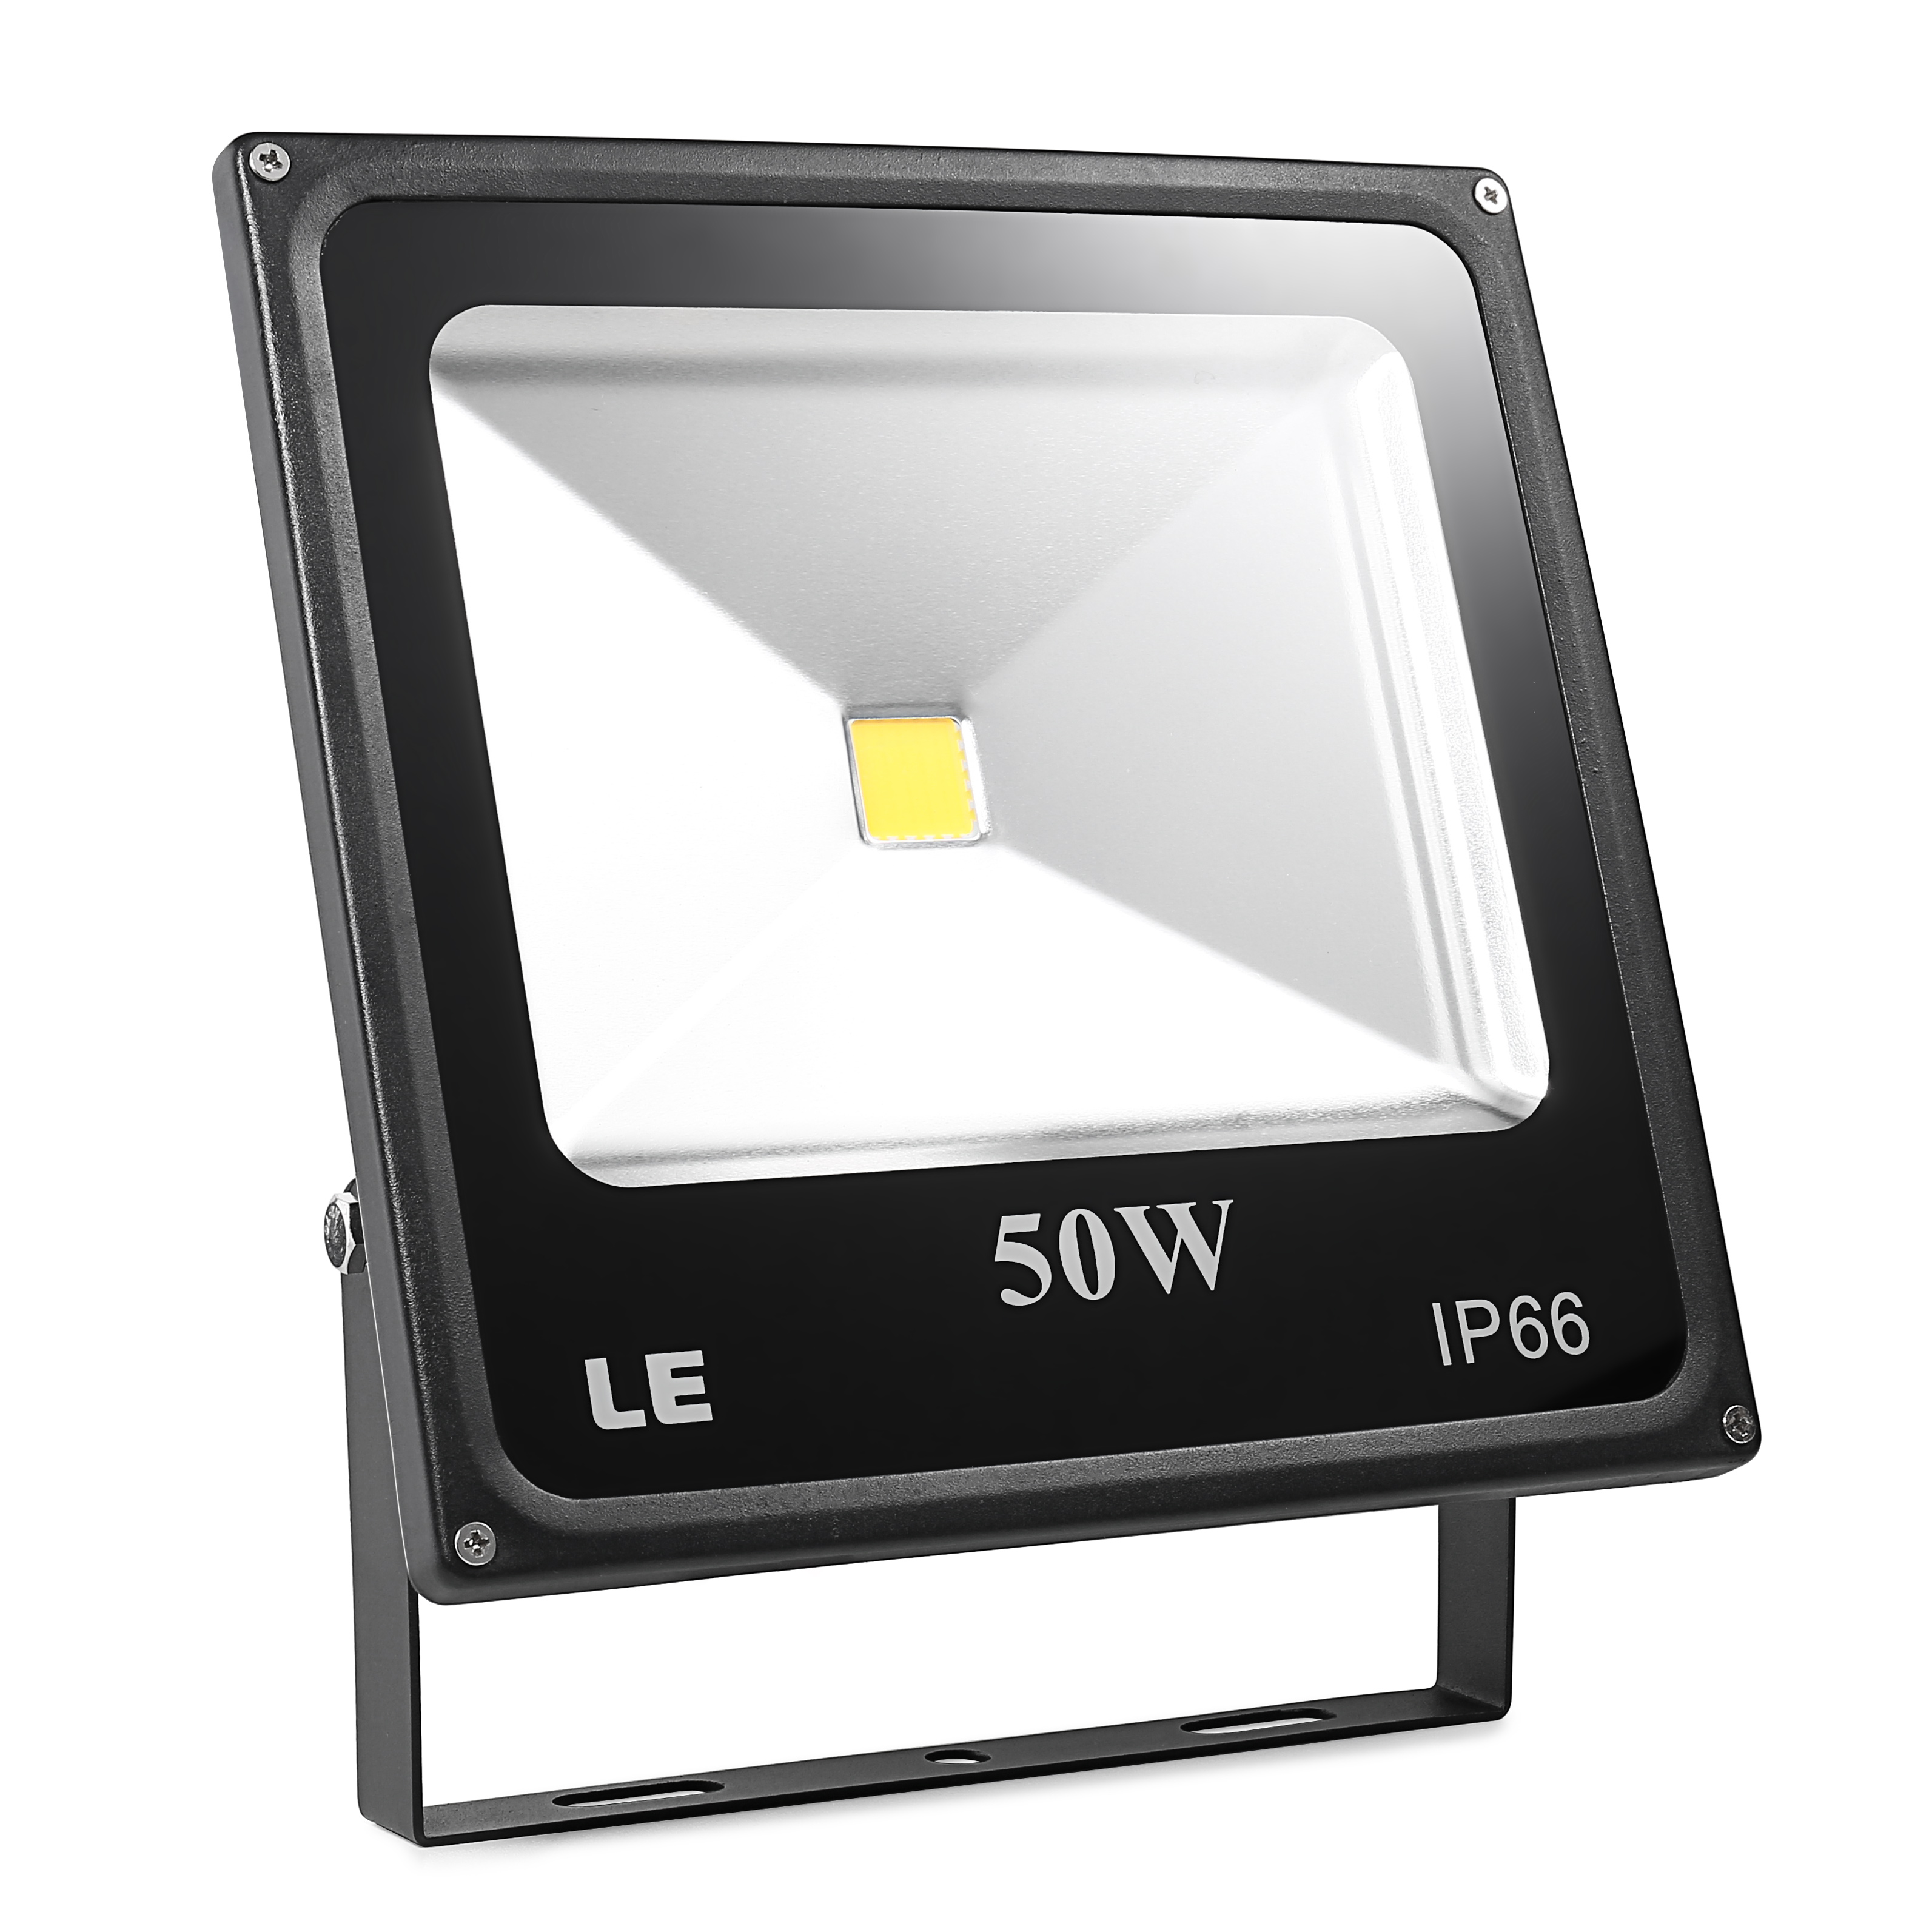 50W Super Bright Outdoor LED Flood Lights,Waterproof IP66, 3750lm |LE®